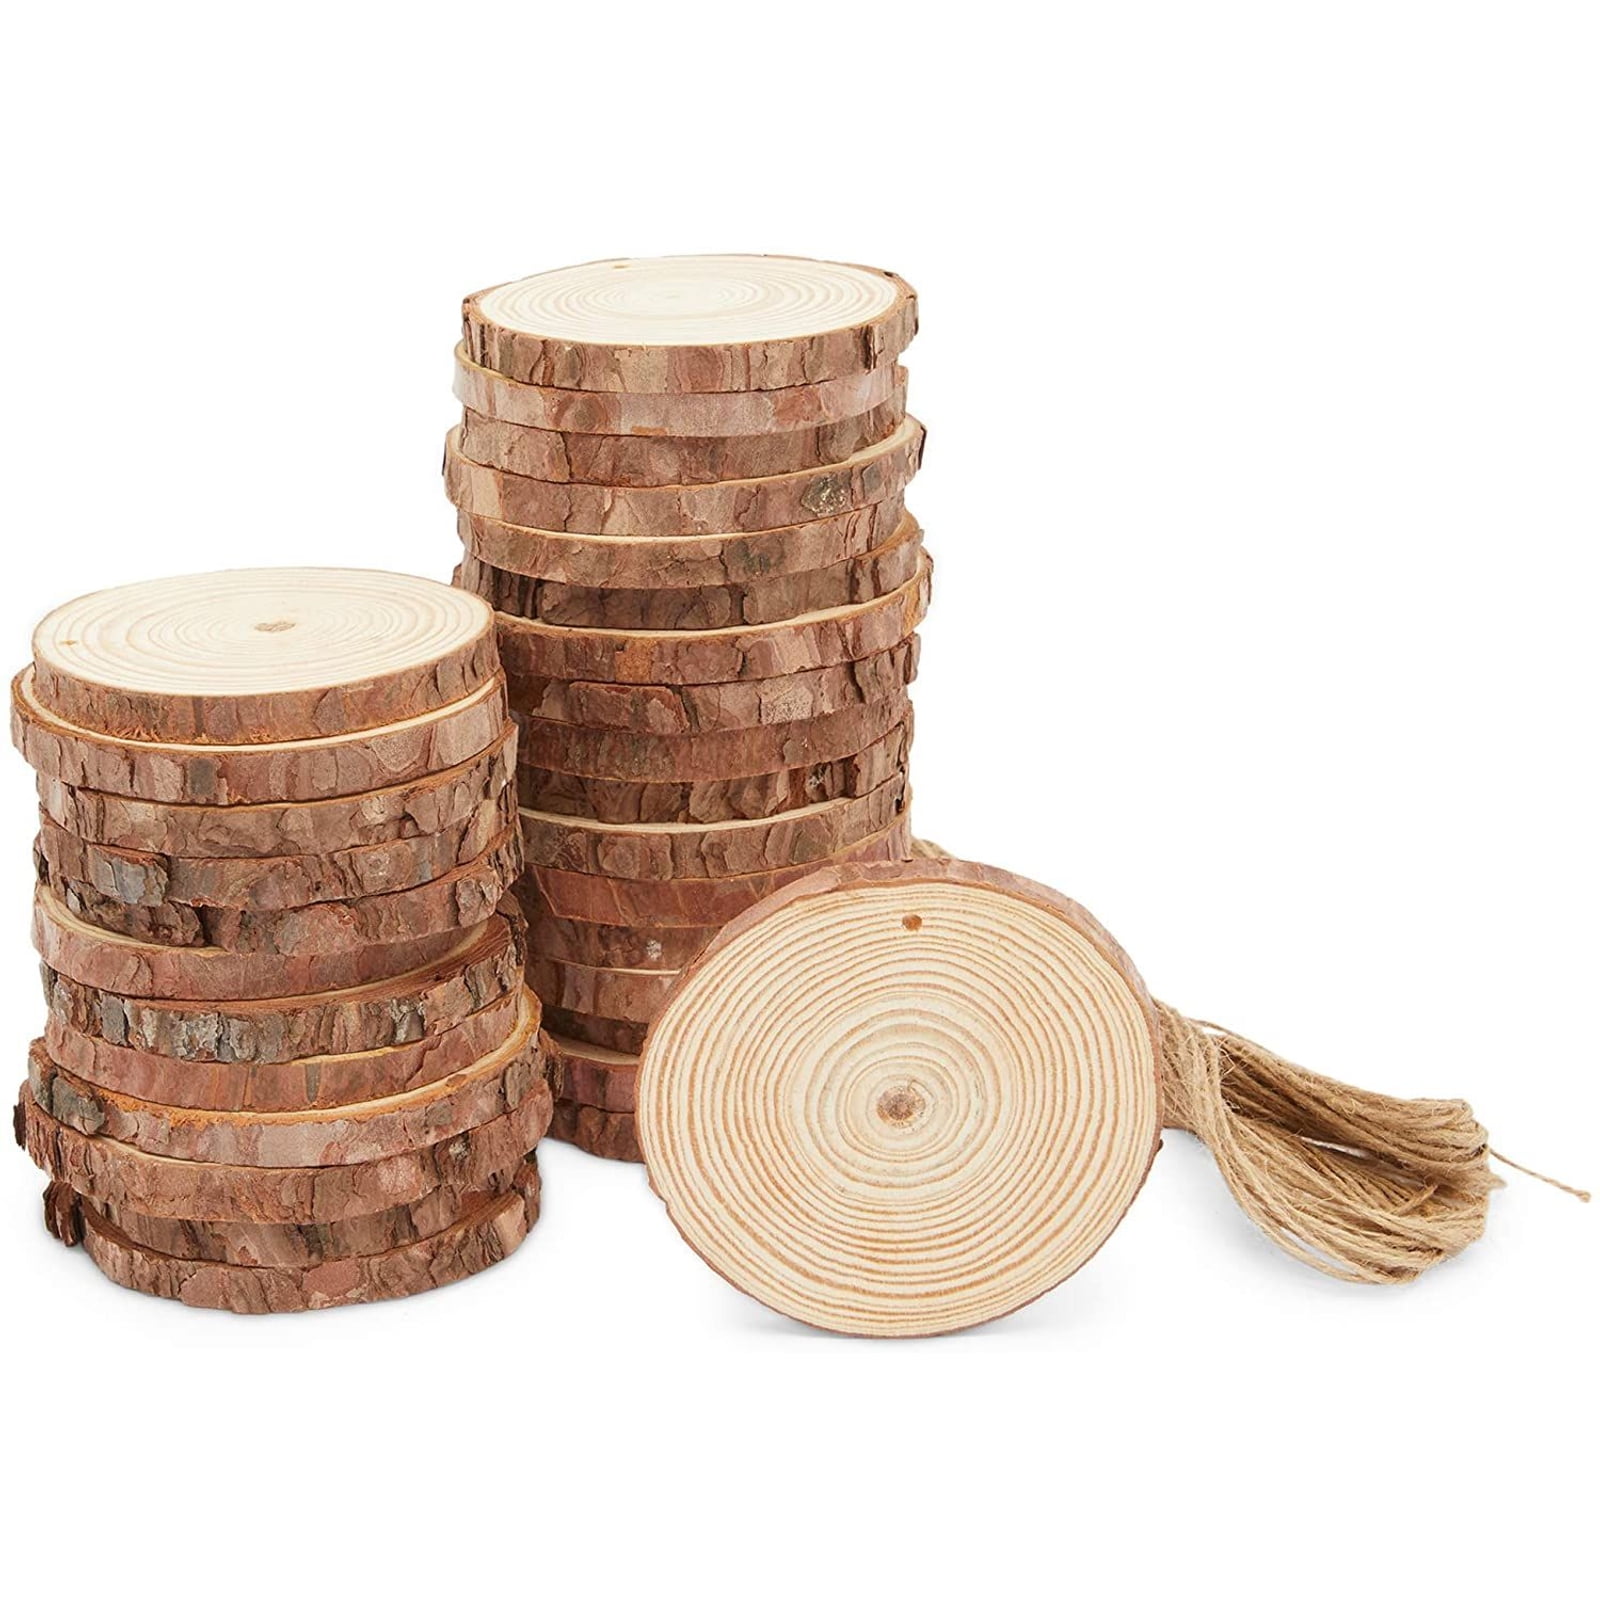 Natural Wood Ornament Slices with Holes 20 Pcs 3.5-4 inch 